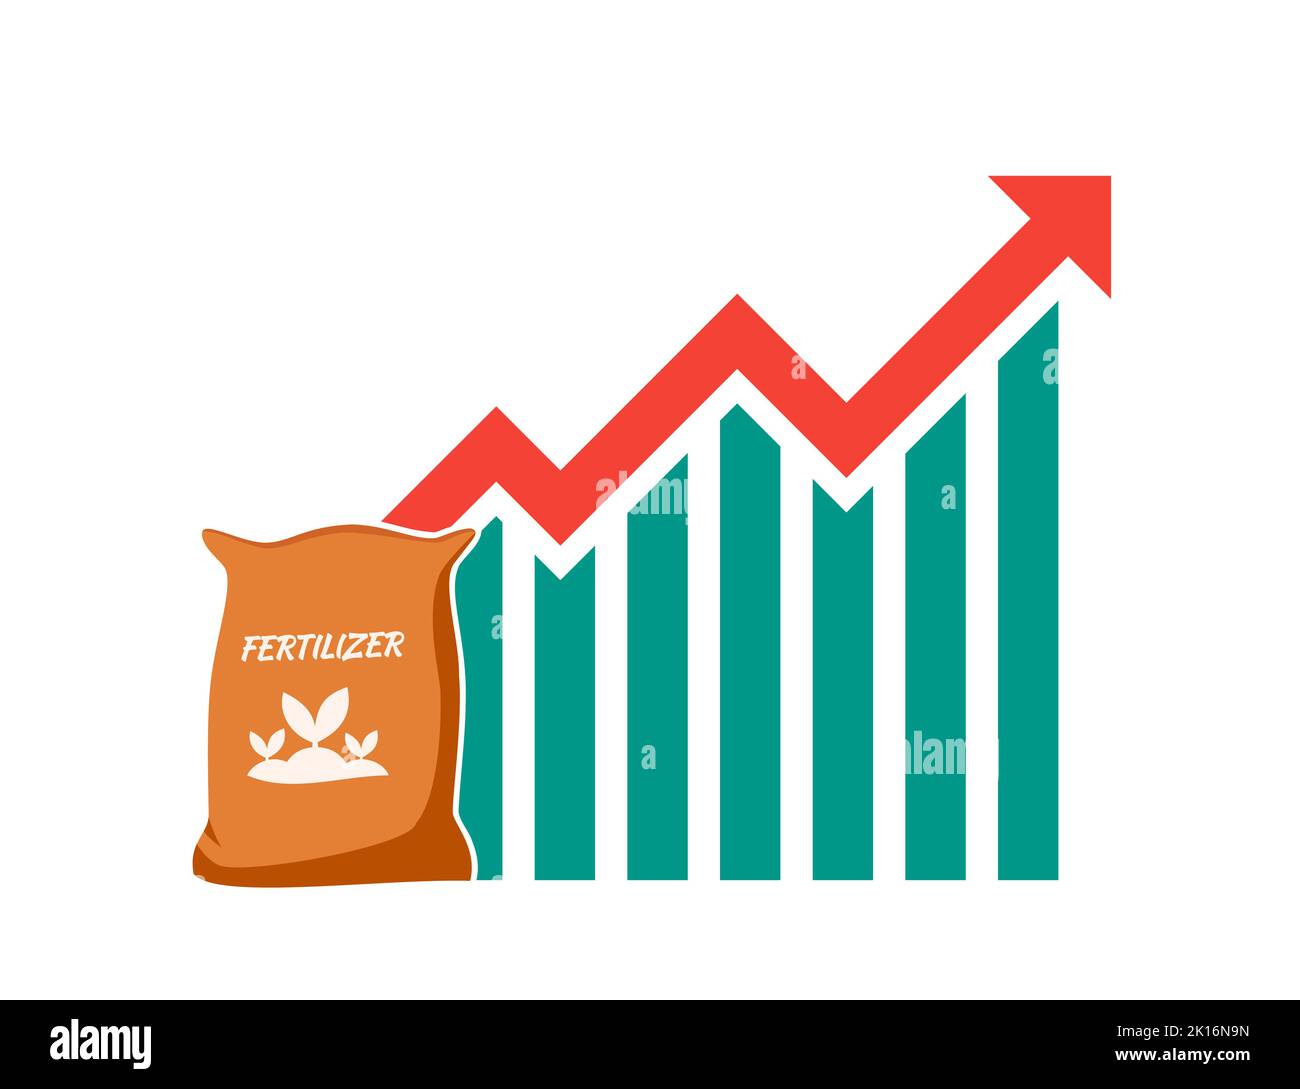 Plant Fertilizer Price or Demand Rise Up Stock Vector